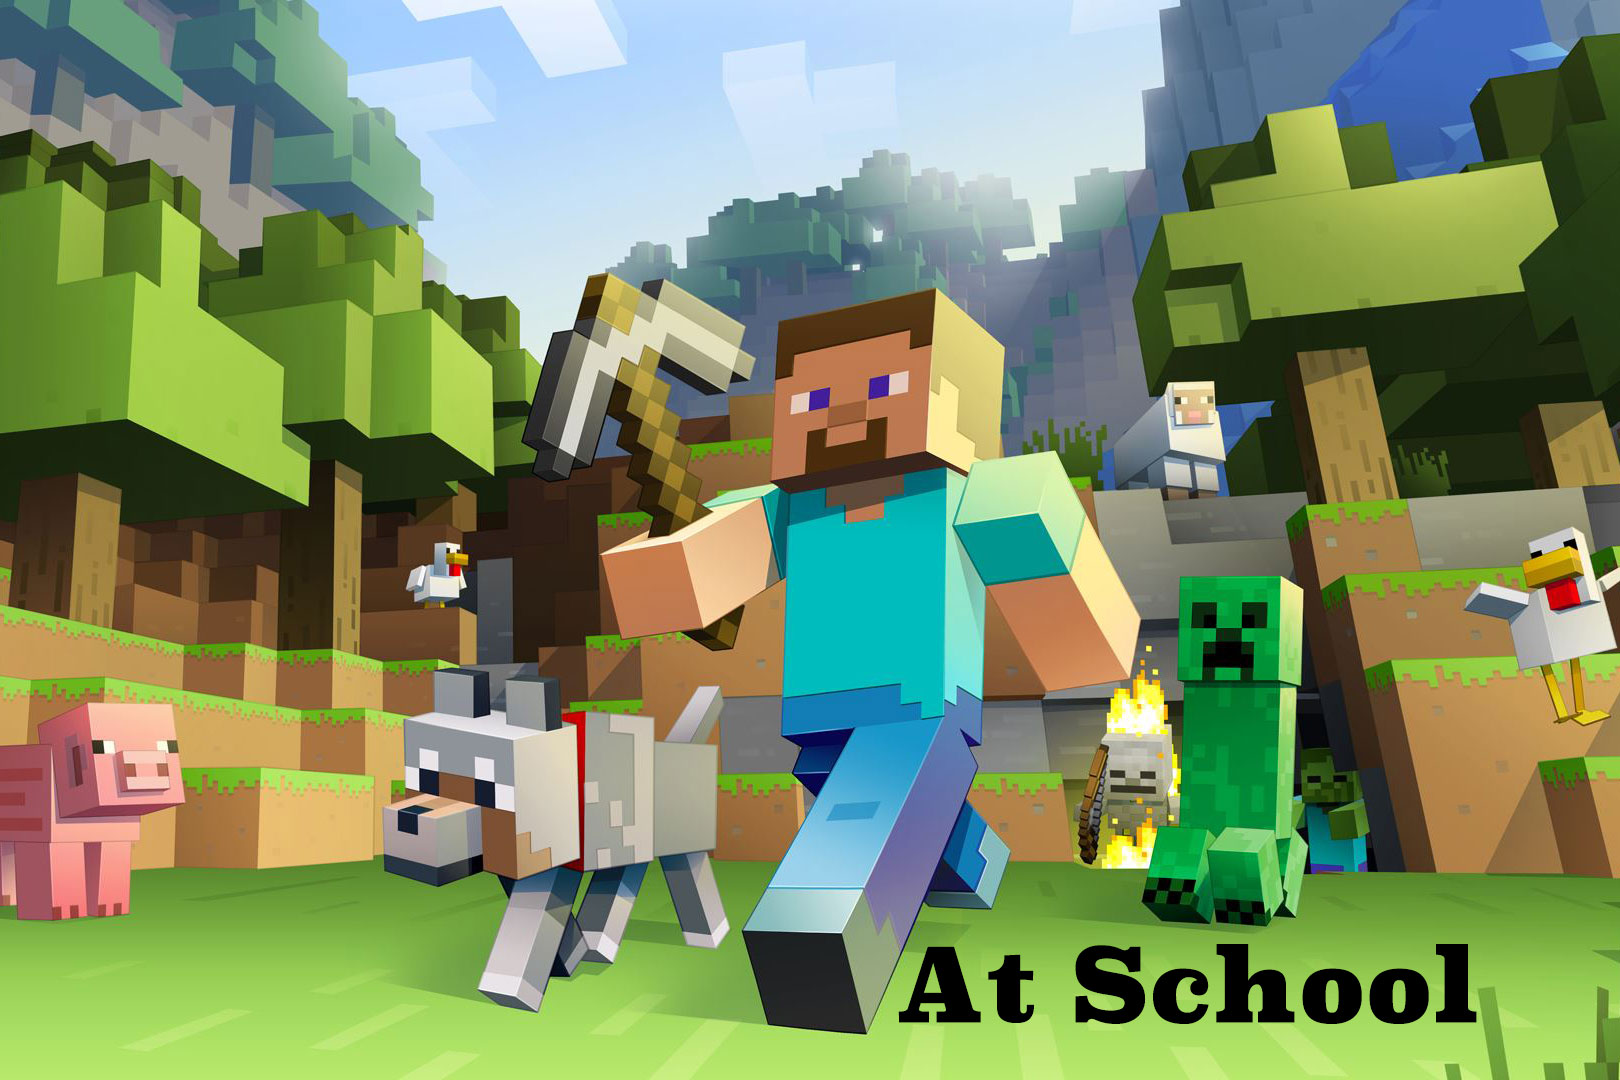 How to Play Minecraft on a School Chromebook